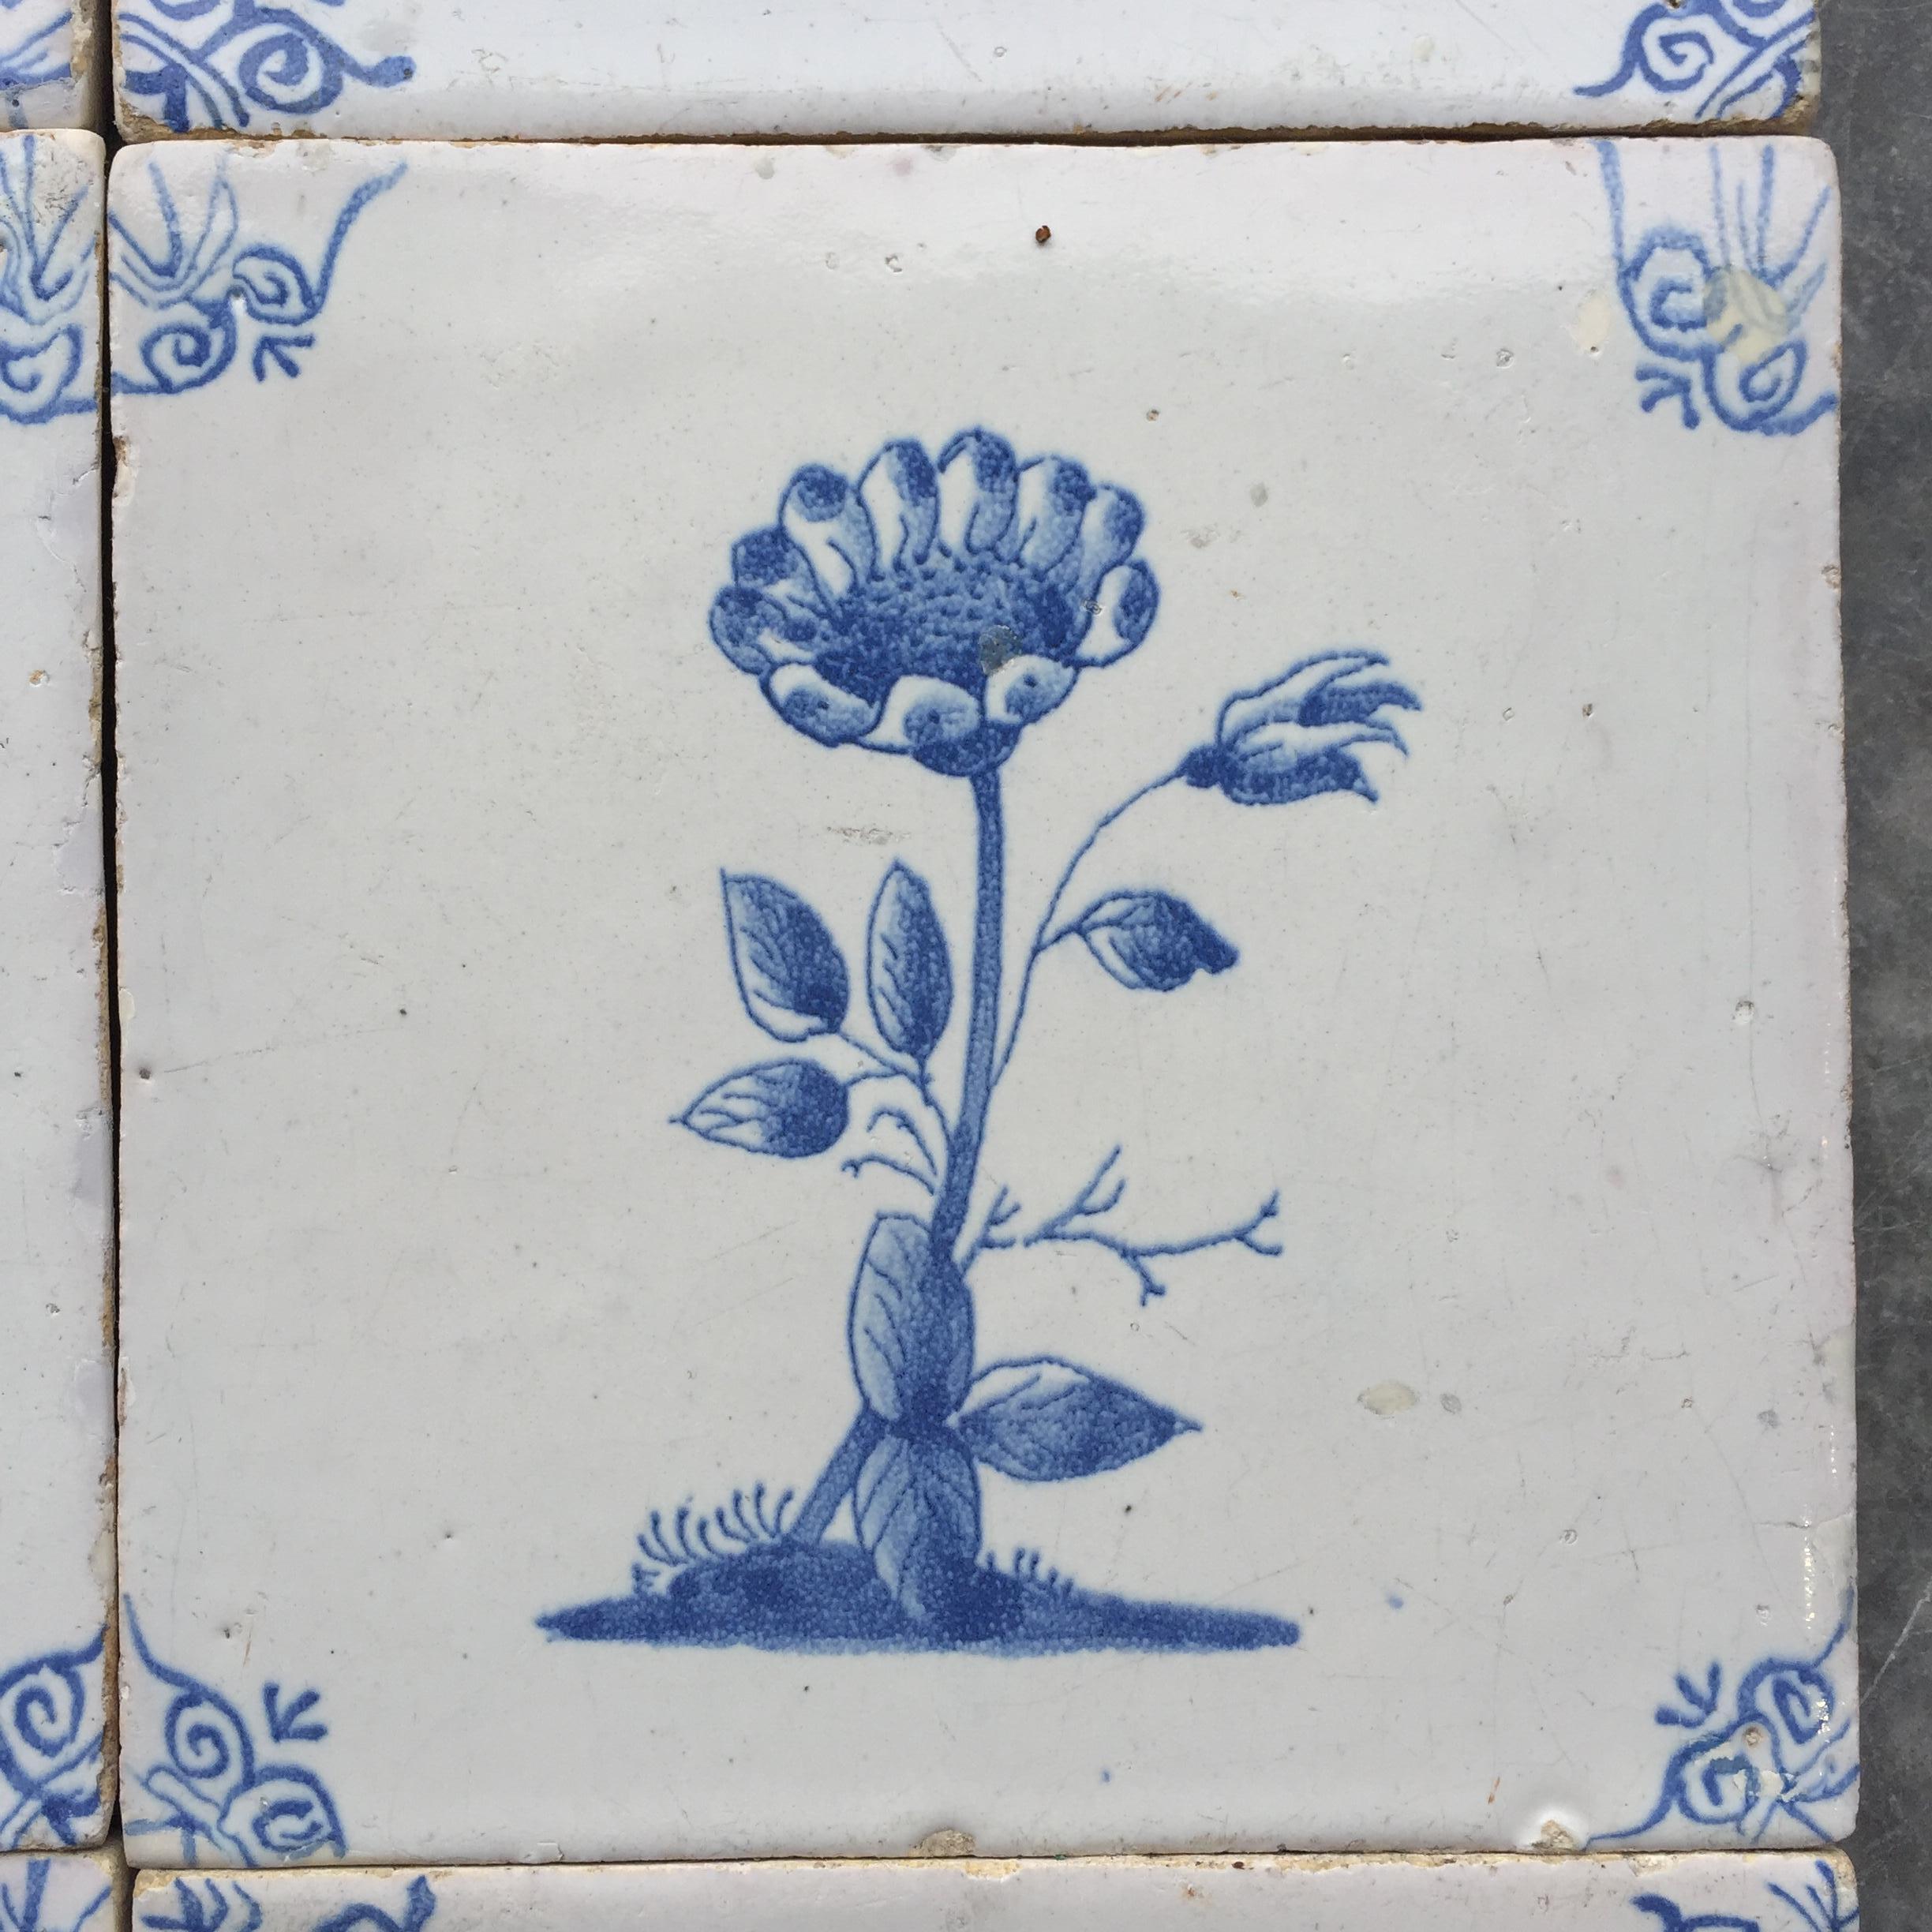 Rare Set of 12 Dutch Delft Tiles with Flowers and Insects, 17th Century 8